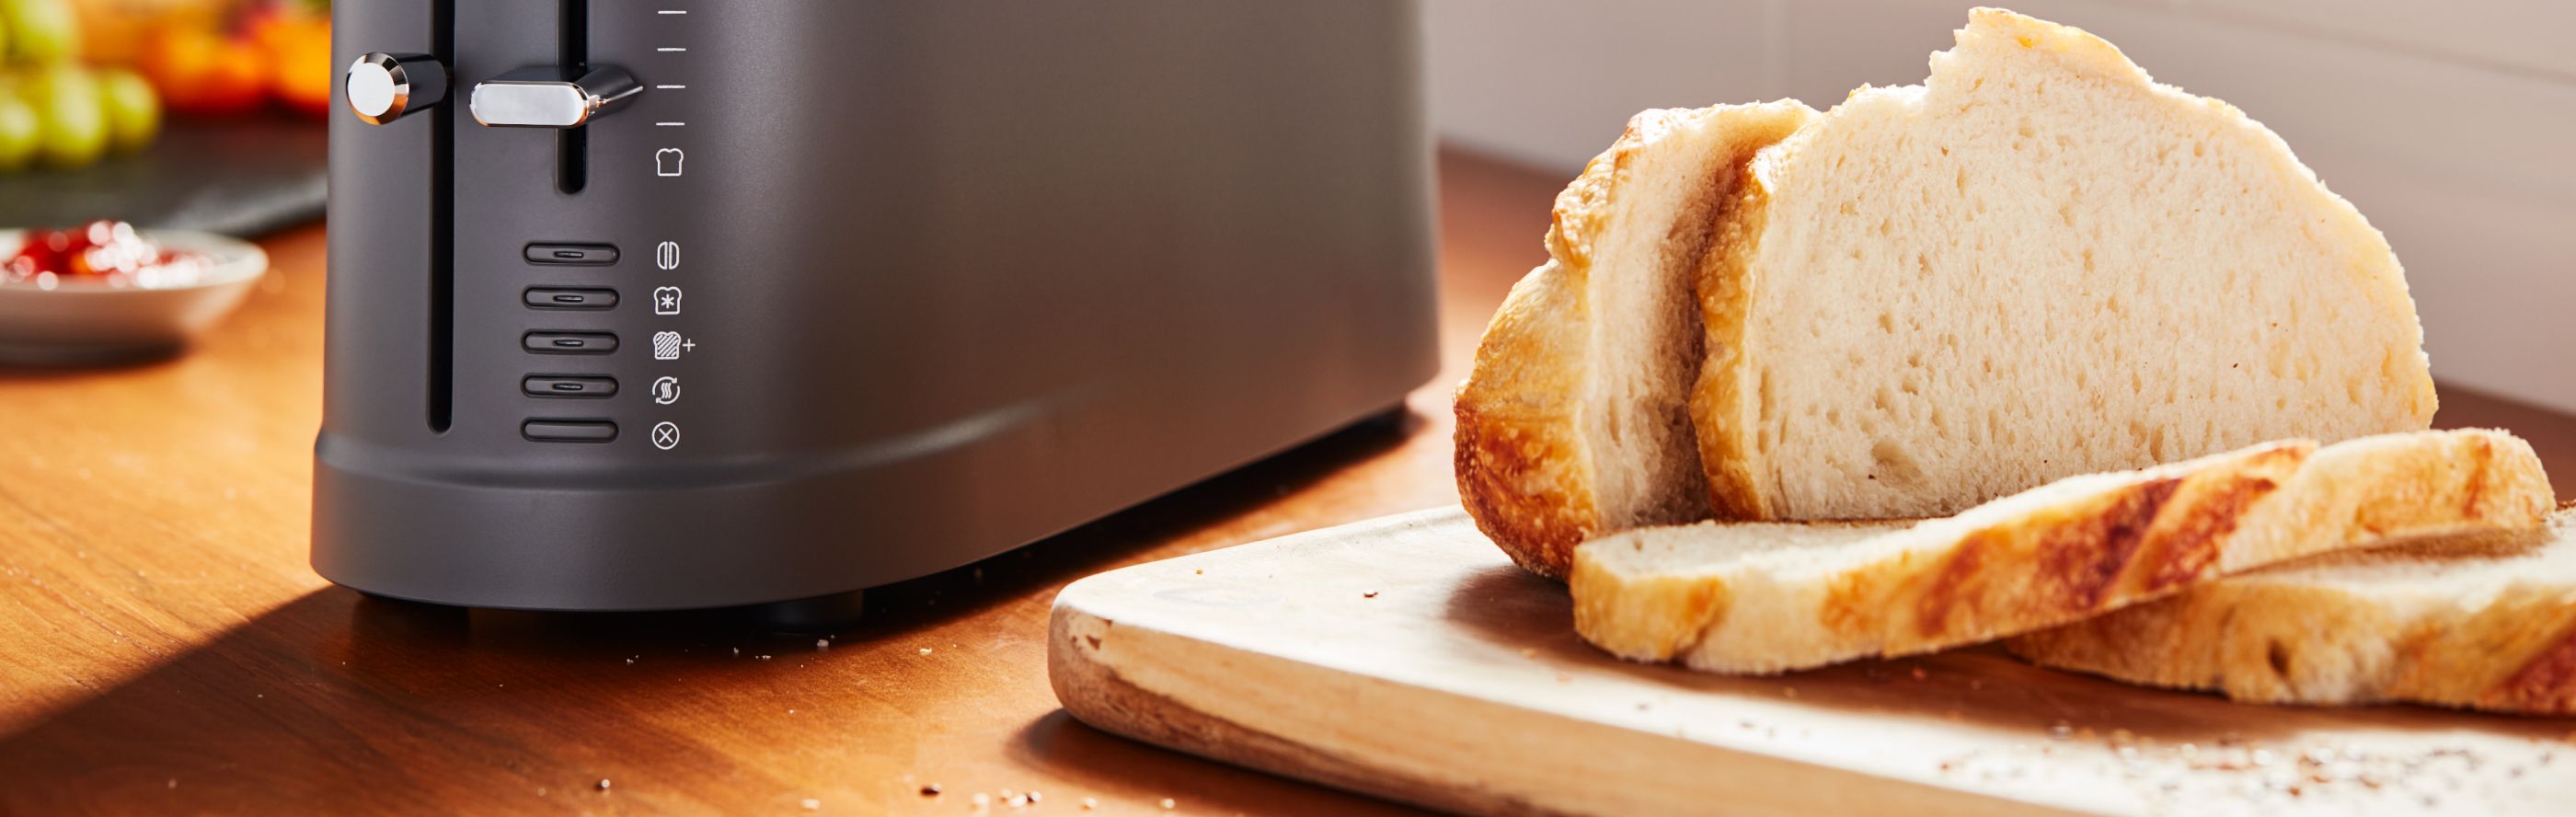 Sliced bread next to a black countertop appliance